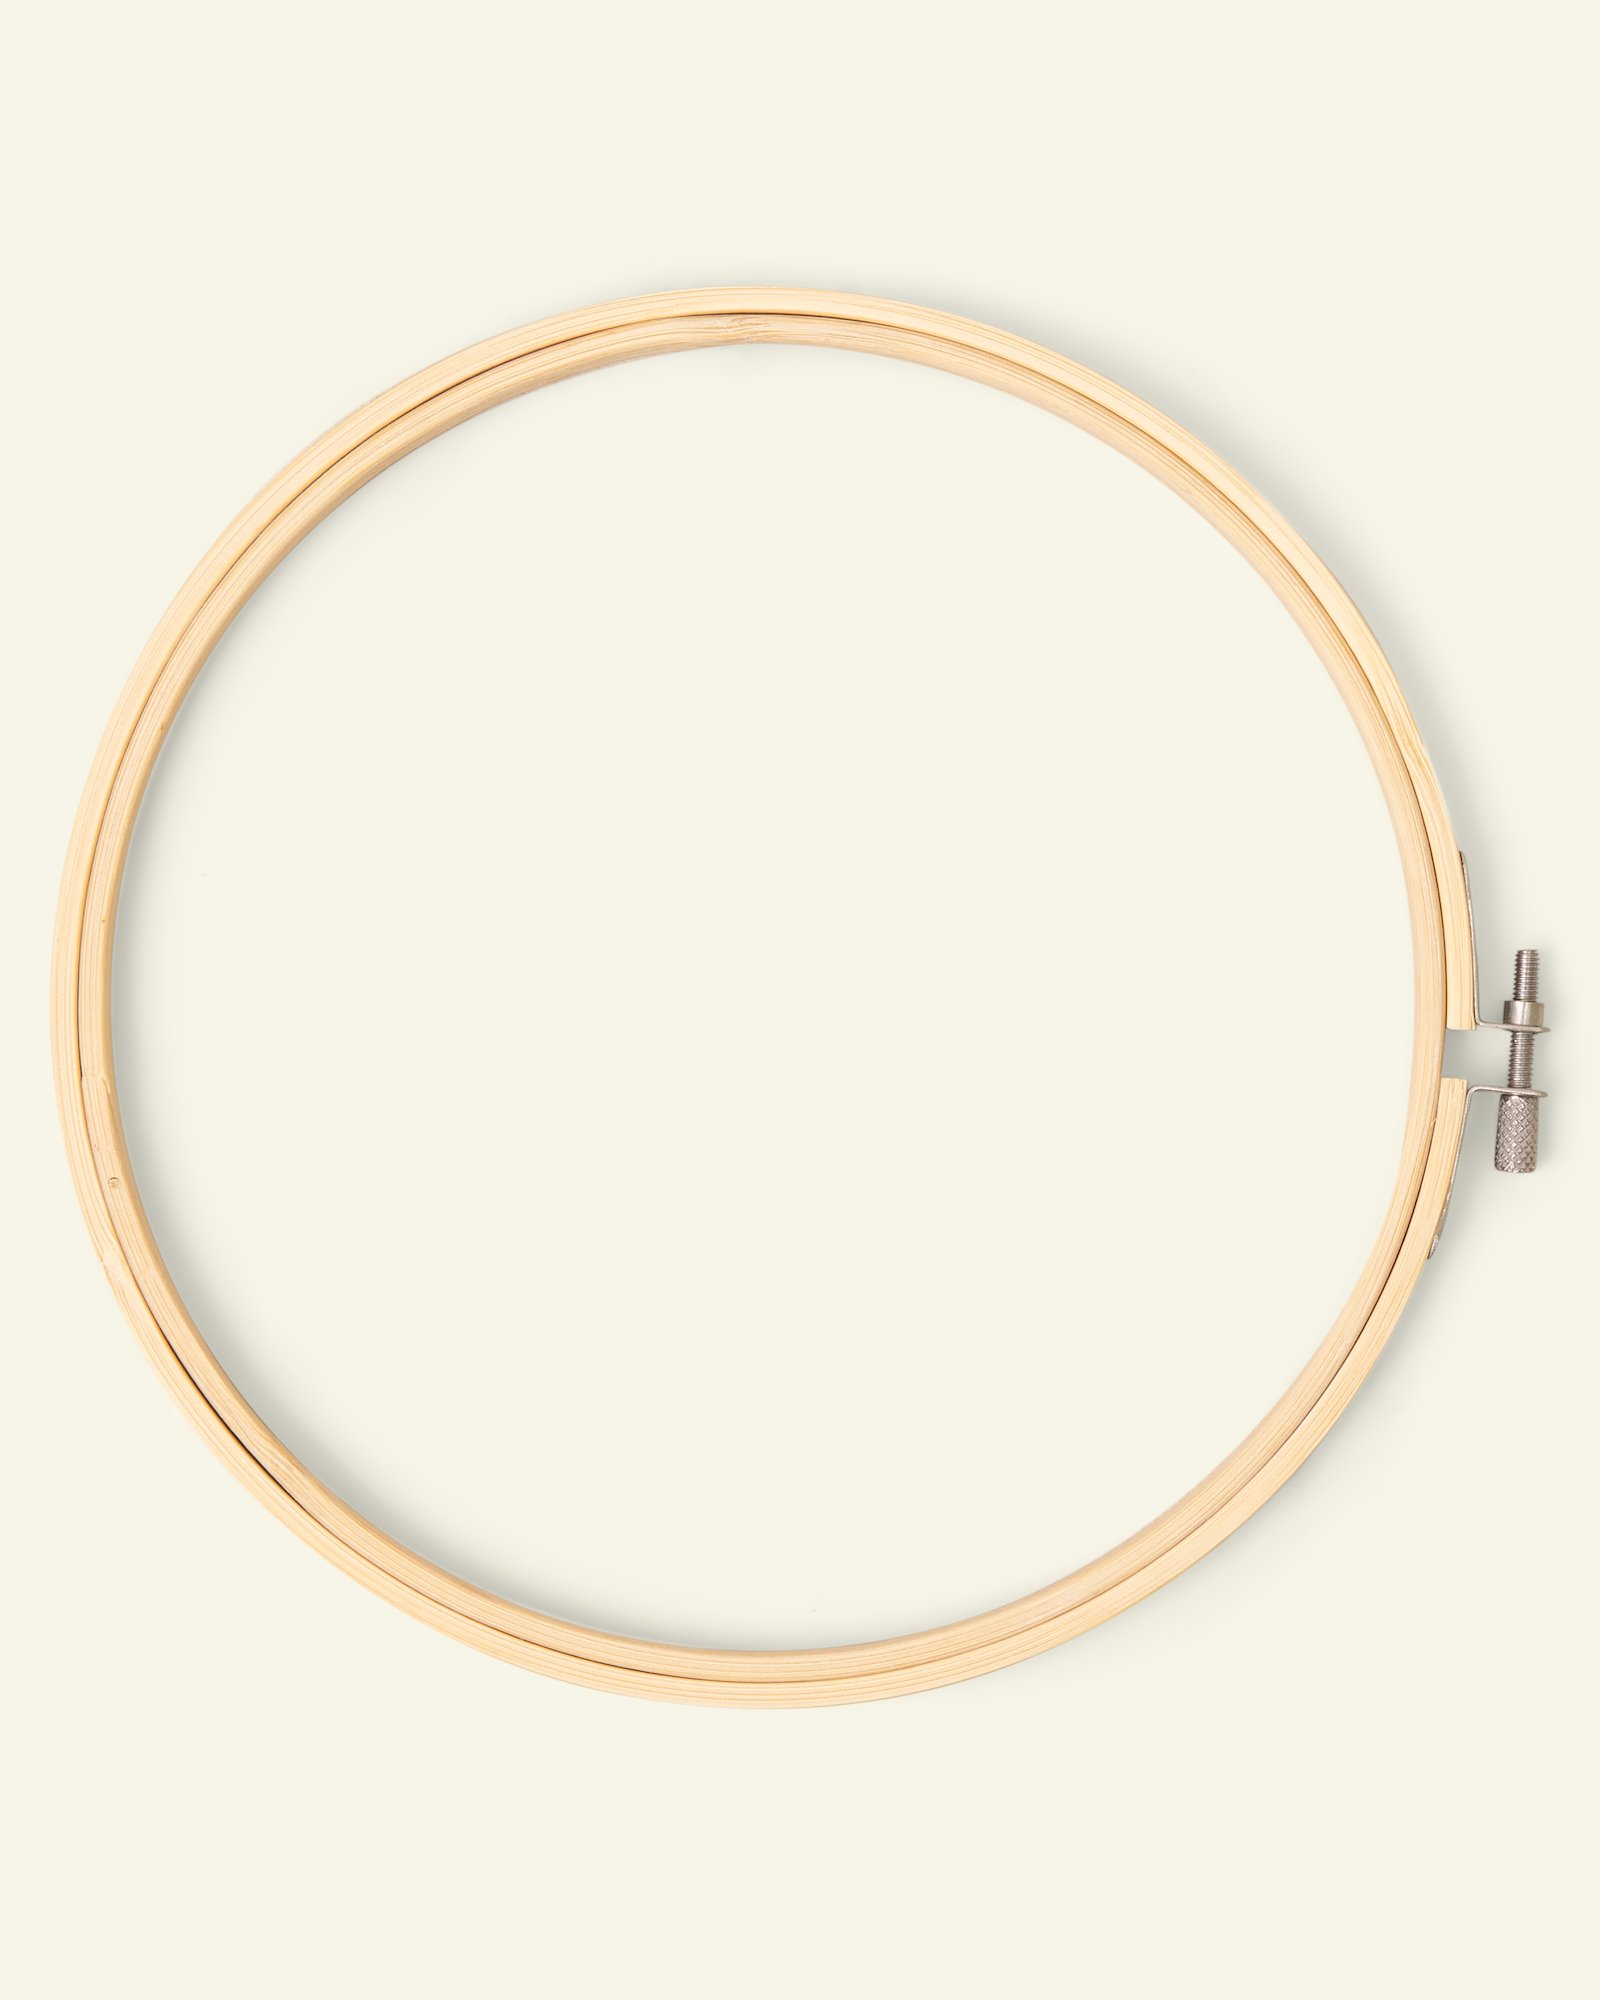 Embroidery hoop 8" - 20,8cm bamboo wood 99006_pack